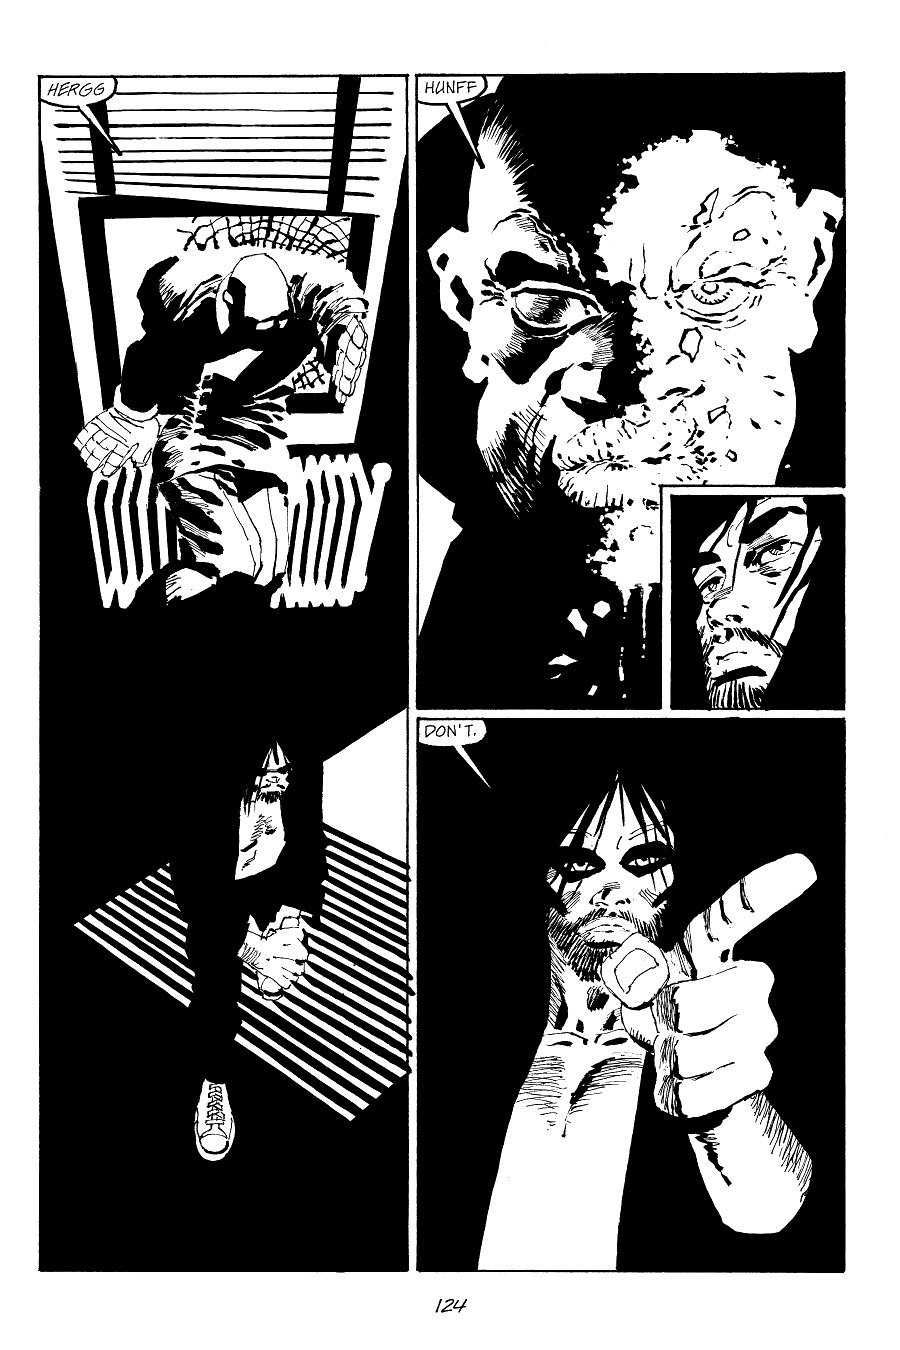 page 124 of sin city 7 hell and back